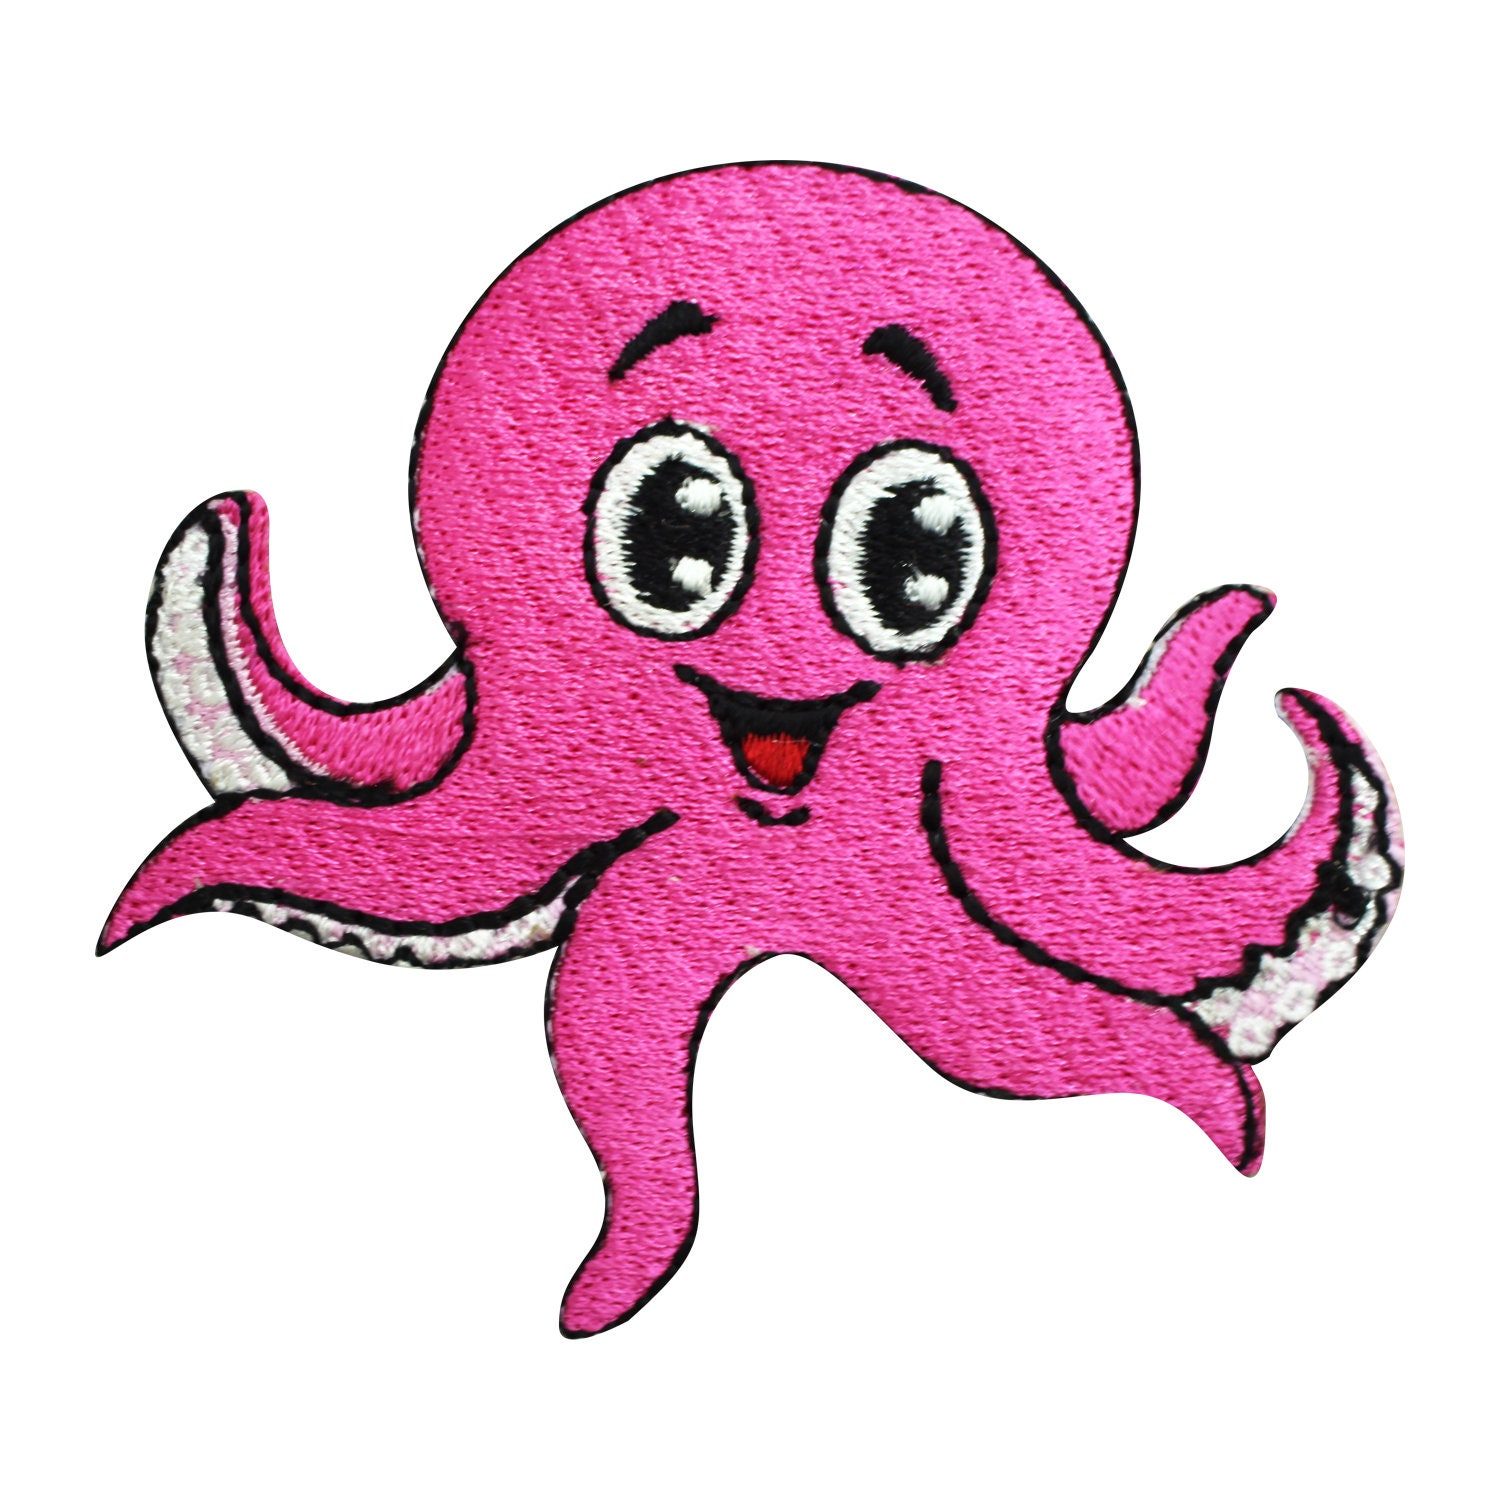 2 Octopus Iron-on Patches, Cute Octopuses to Iron On, Sea Creature